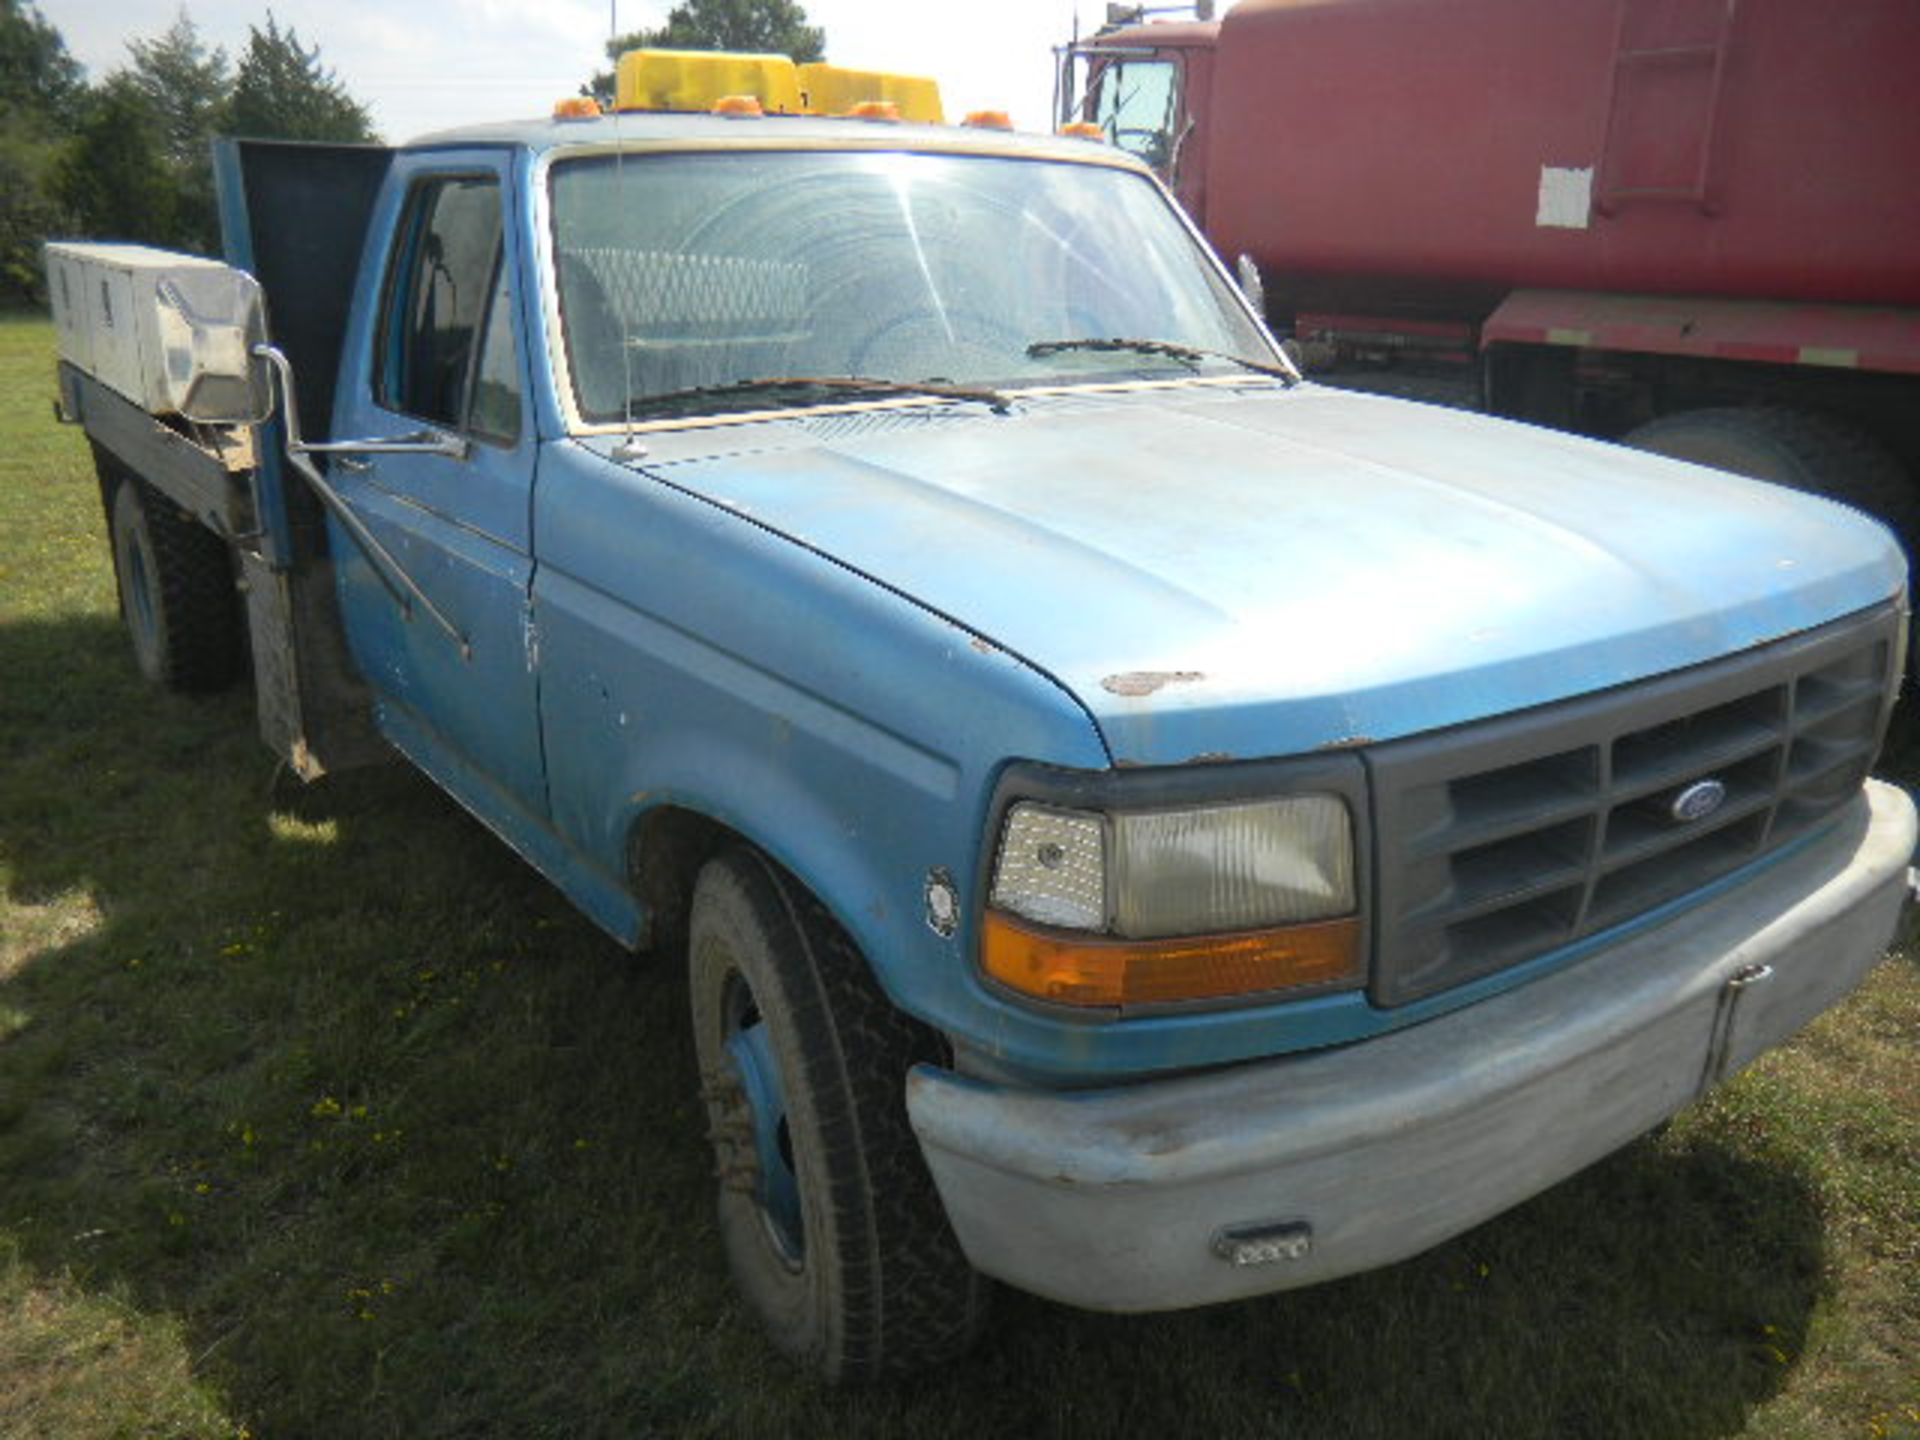 1996 Ford 1 Ton Flatbed Truck w/Utility Toolboxes - Asset I.D. #4 - Last of Vin (CA47275)